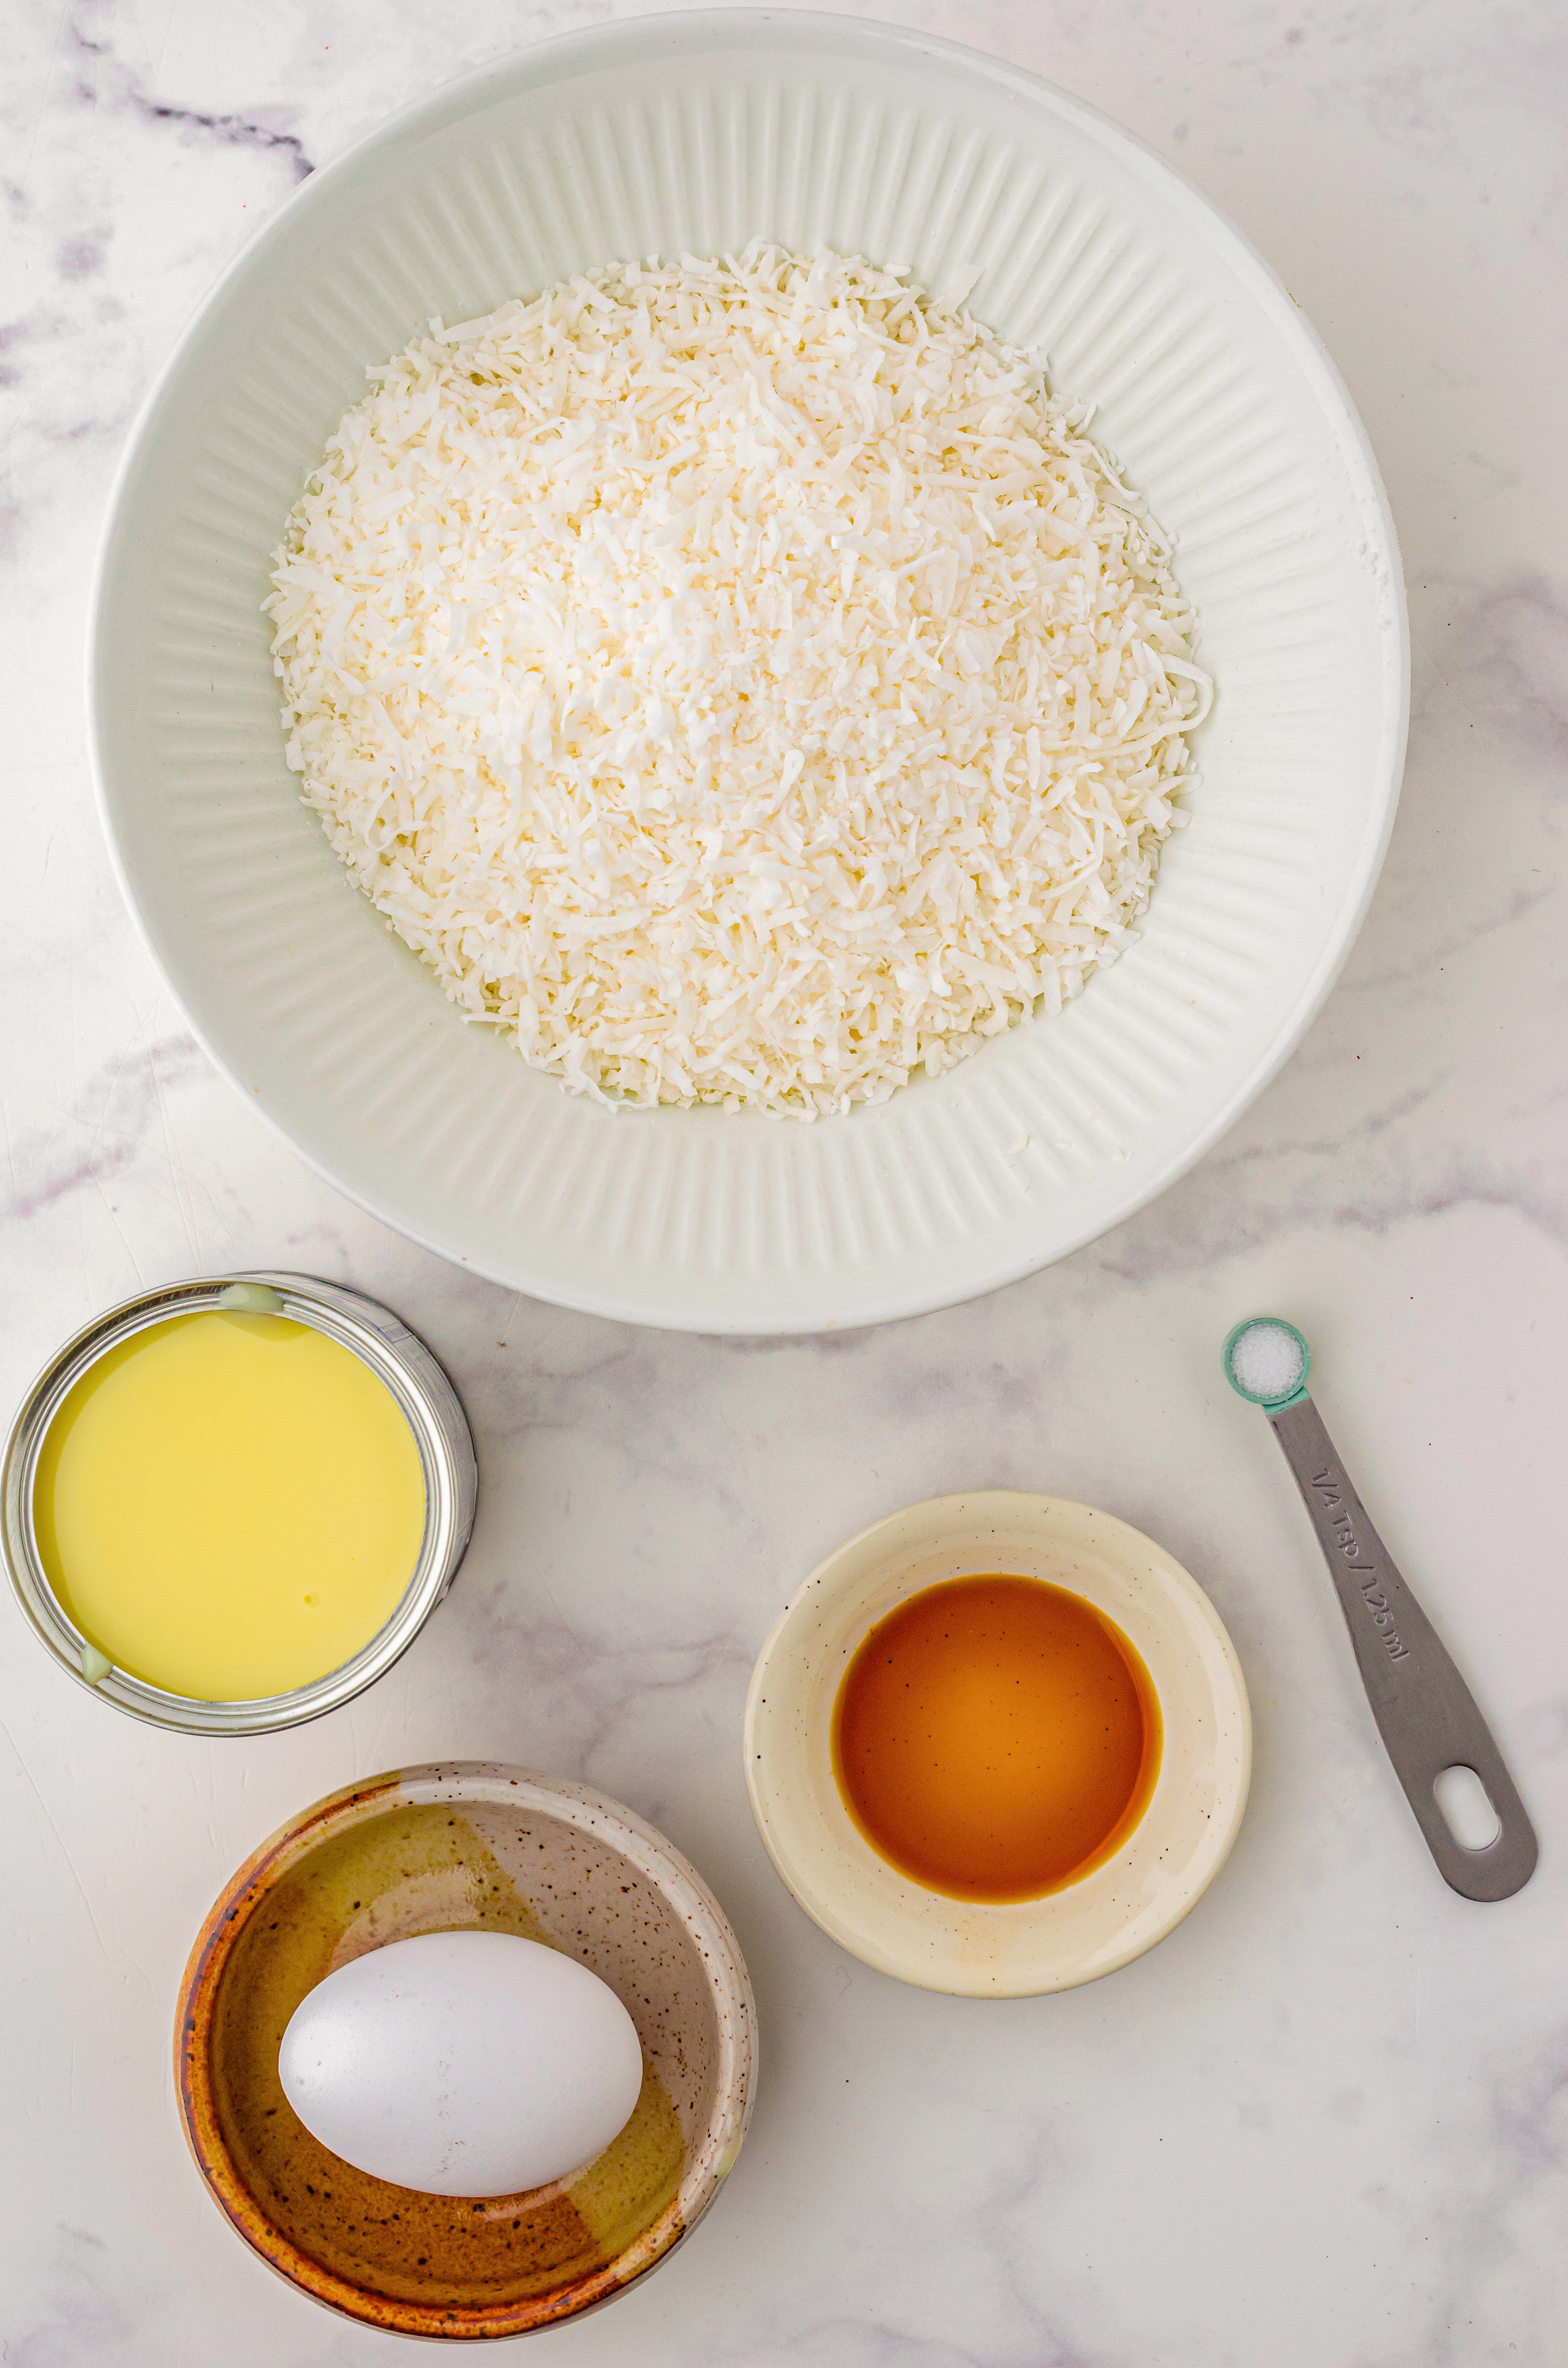  Measured ingredients needed to make Coconut Macaroons laid out in bowls on a marble countertop.